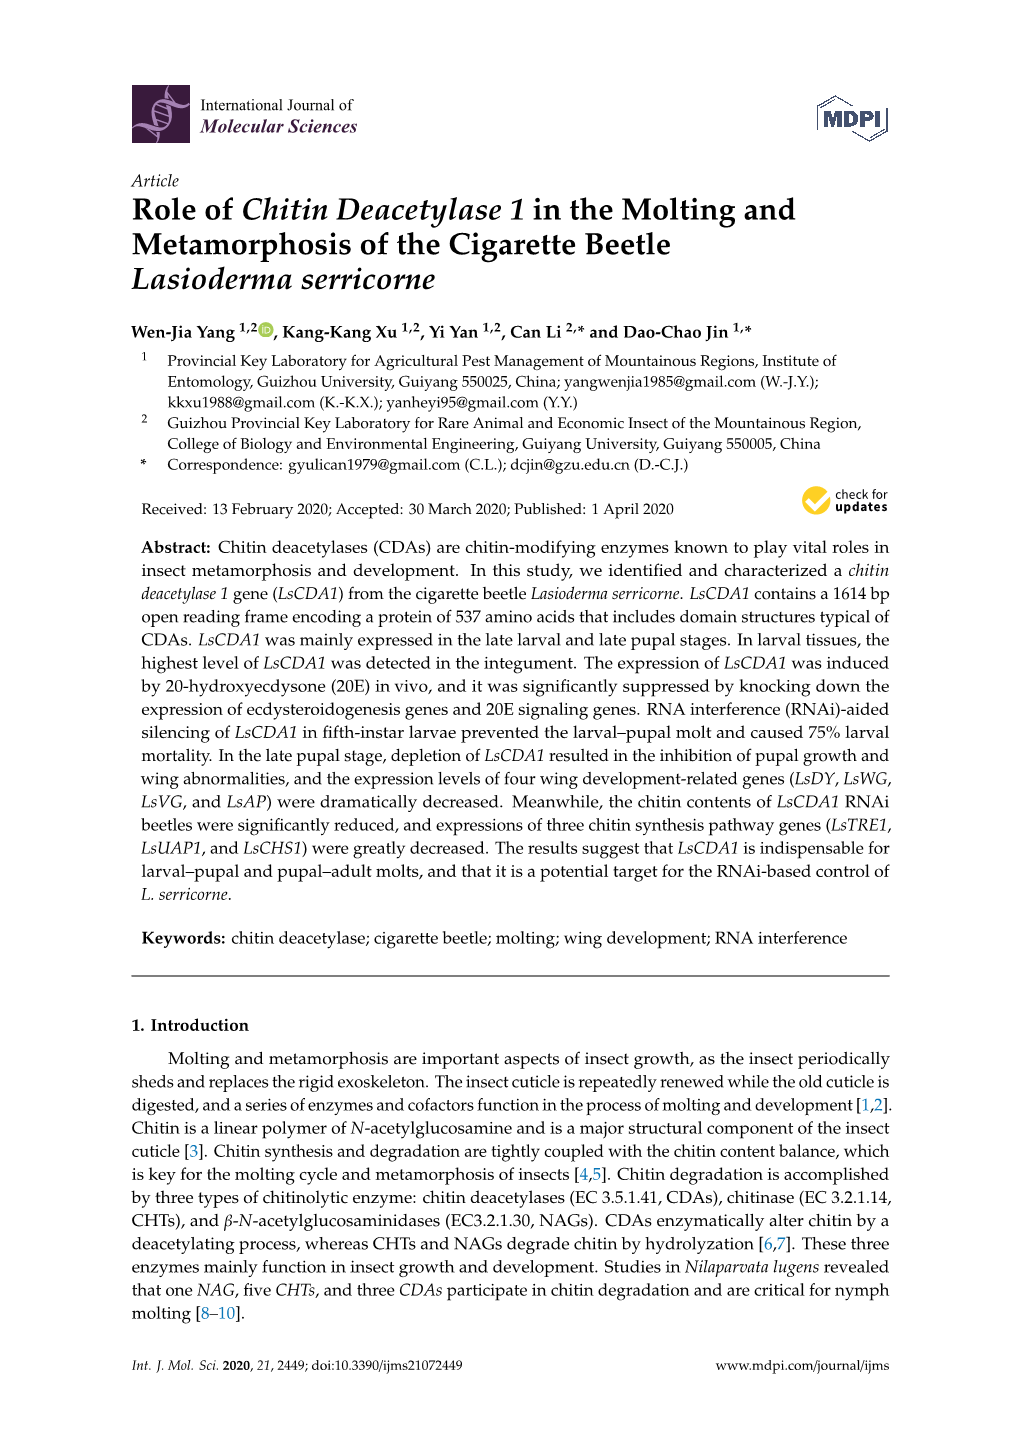 Role of Chitin Deacetylase 1 in the Molting and Metamorphosis of the Cigarette Beetle Lasioderma Serricorne